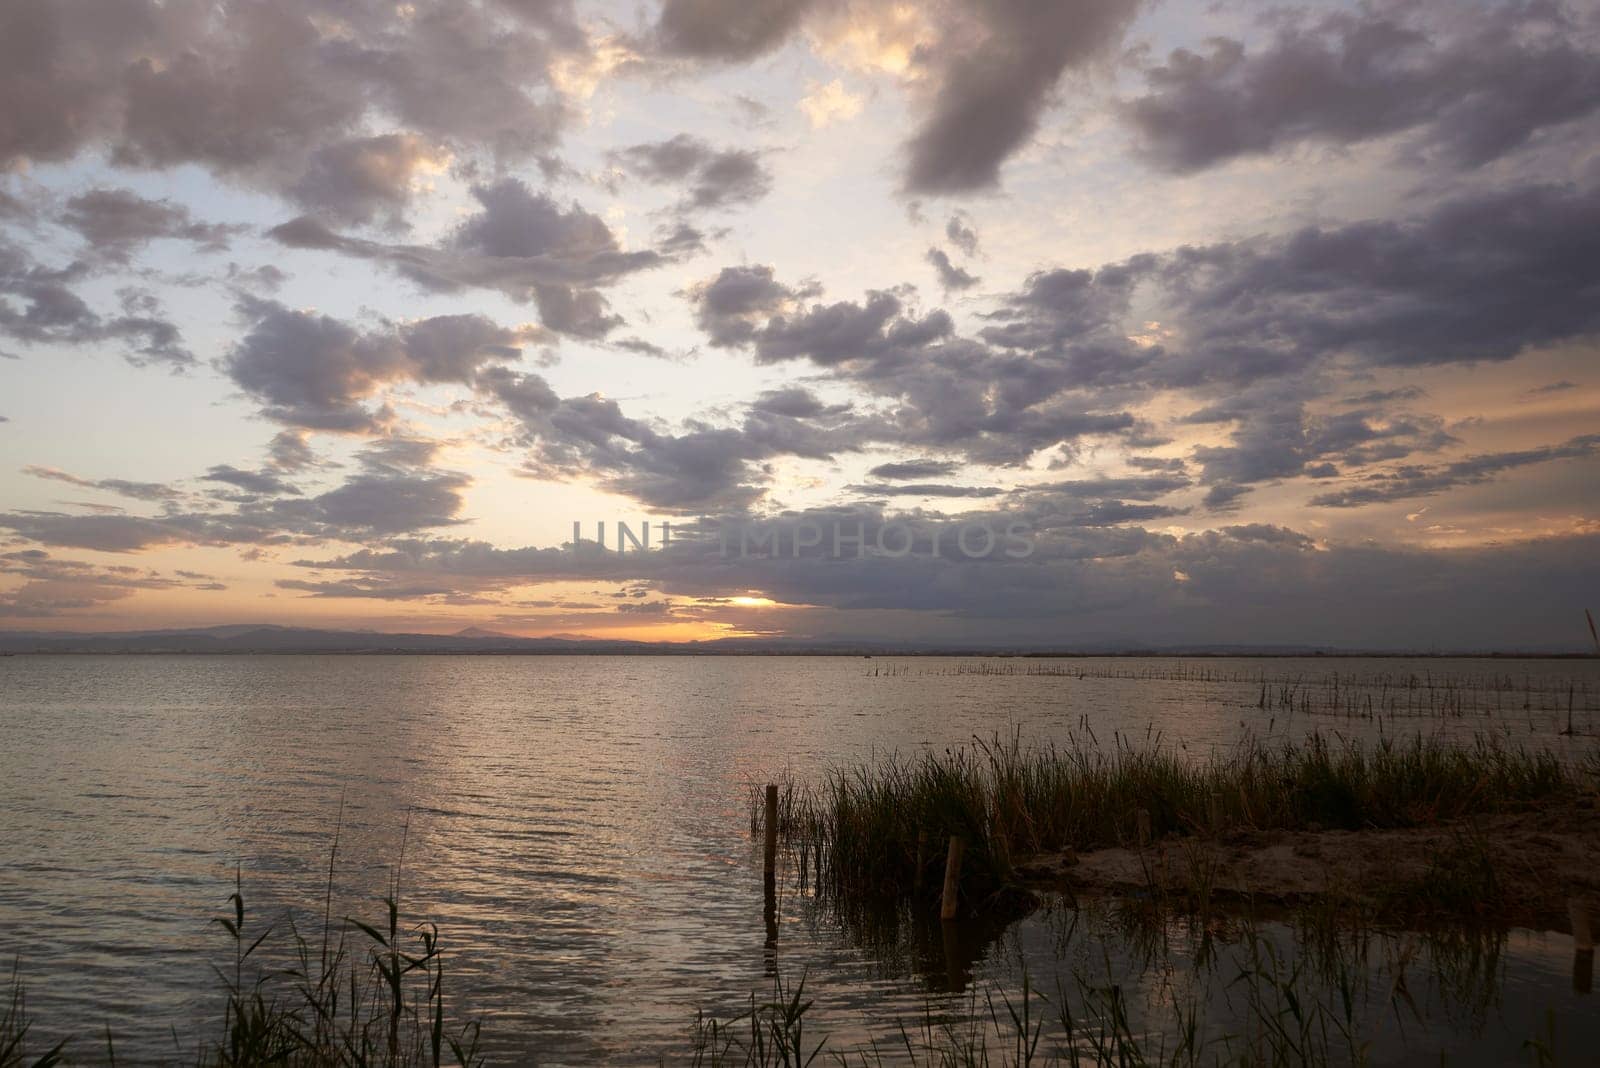 A sunset over the Valencia lagoon amidst the clouds.Reeds, reflections, calm waters, Mediterranean tradition and ecosystem,